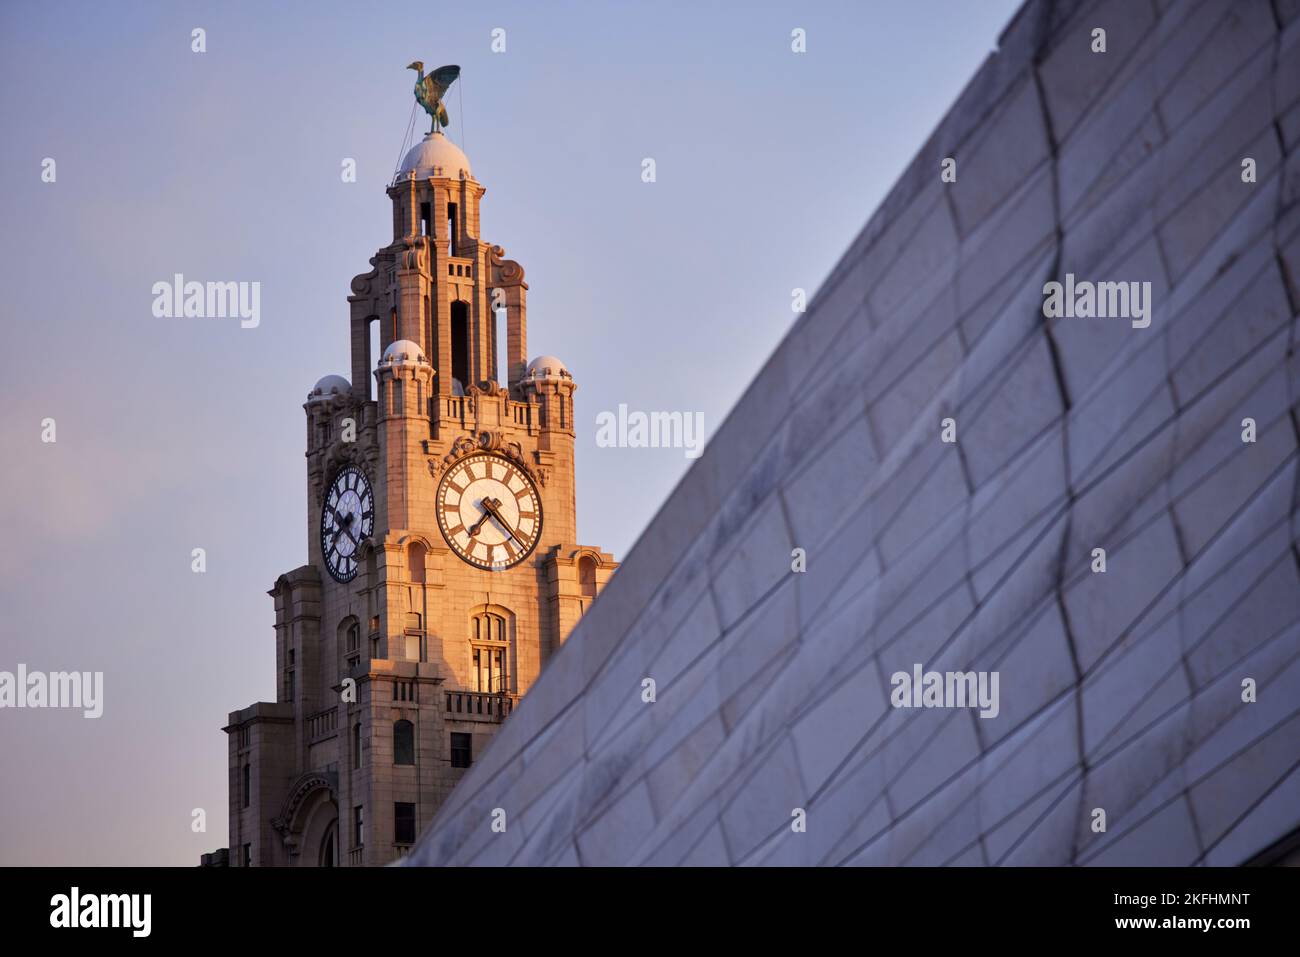 The Royal Liver Building Grade I listed building in Liverpool, England. Stock Photo